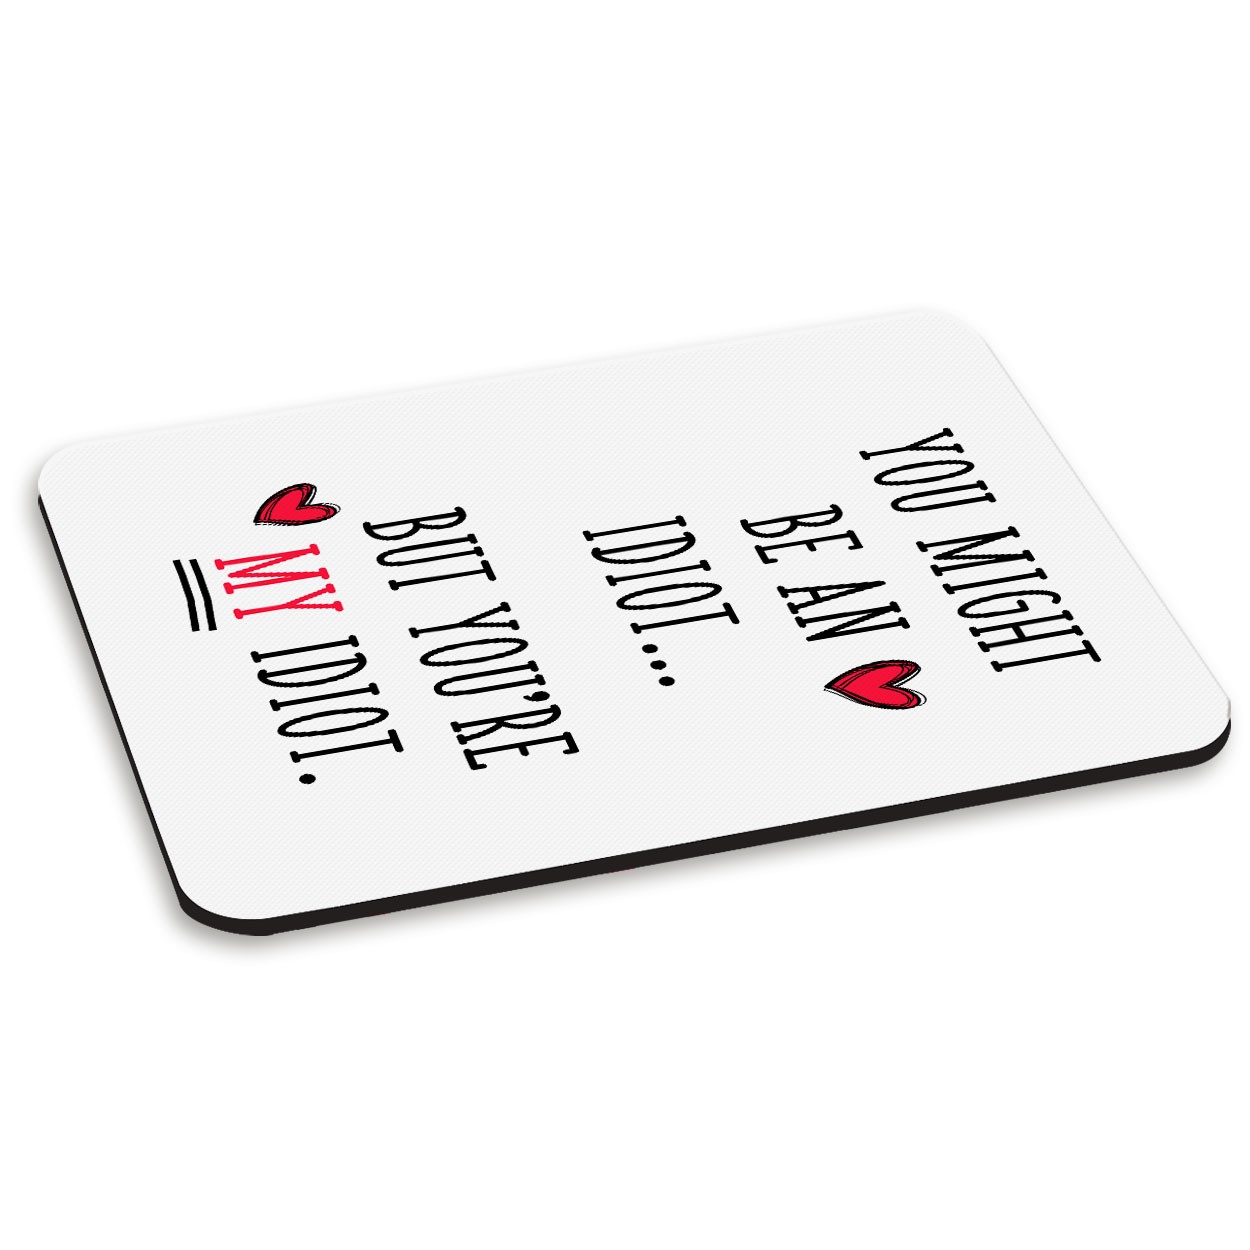 You Might Be An Idiot But You're My Idiot PC Computer Mouse Mat Pad